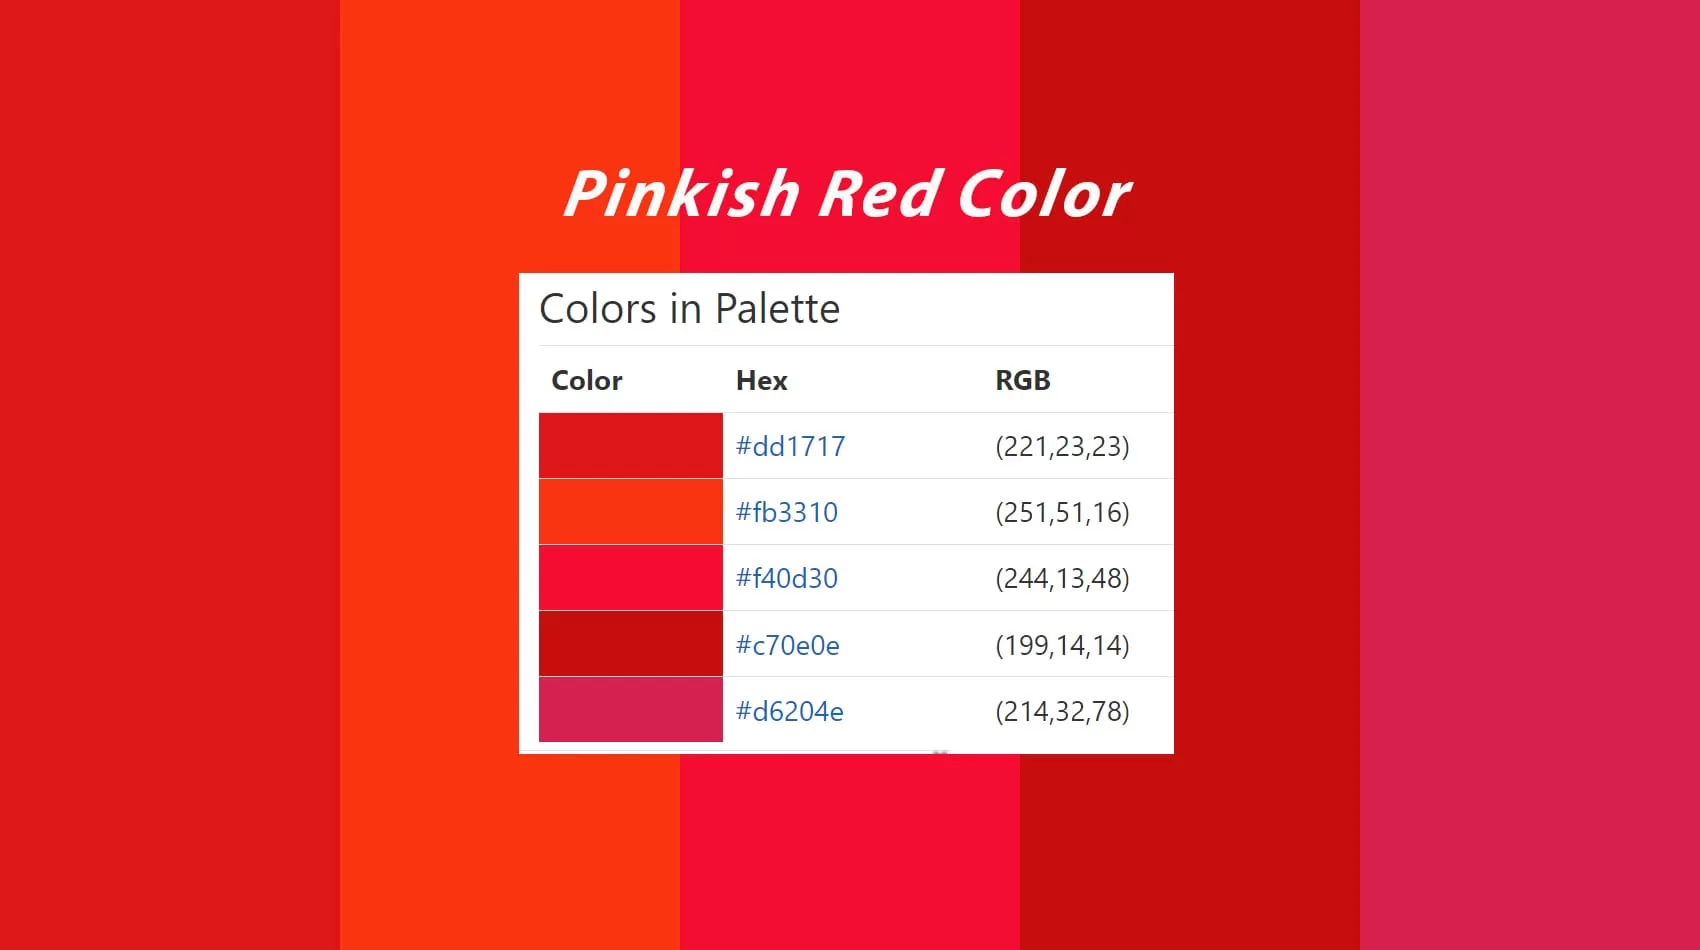 Pinkish Red Color